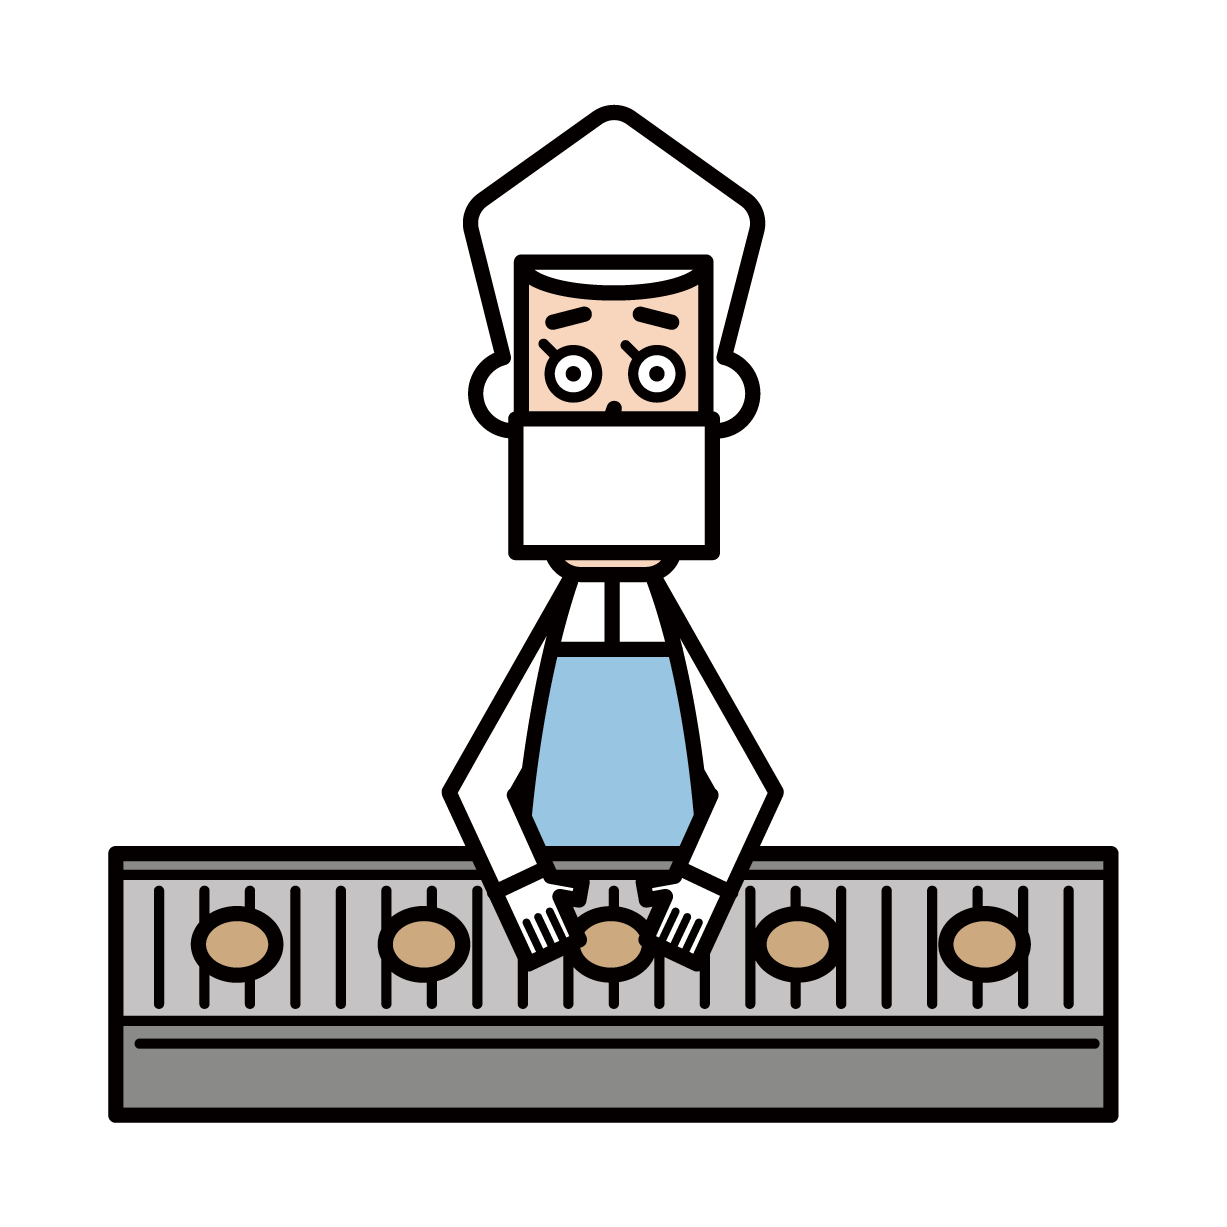 Illustration of an employee of a food manufacturer